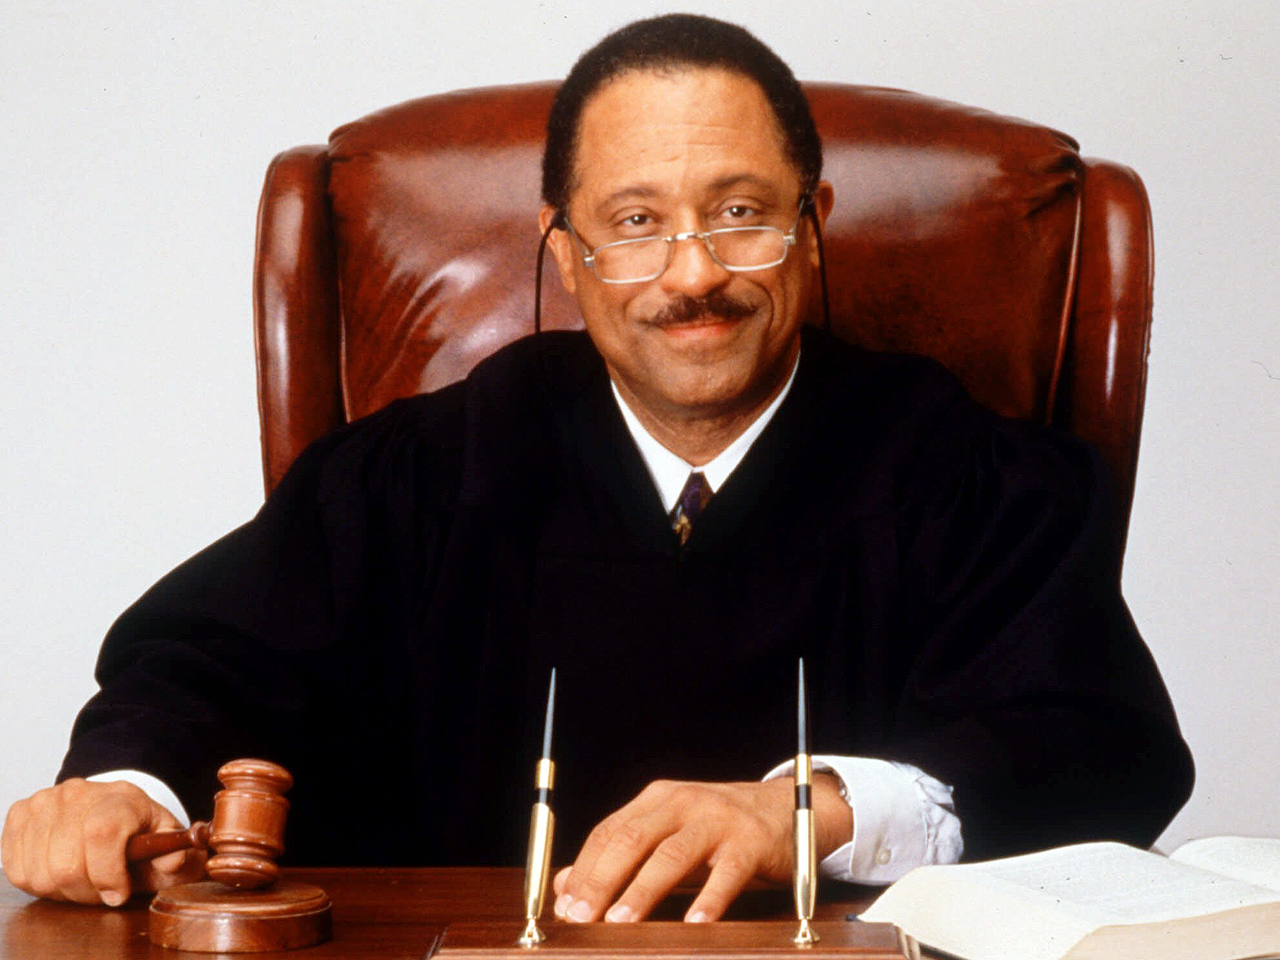 Judge Joe Brown Cancelled After 15 Years